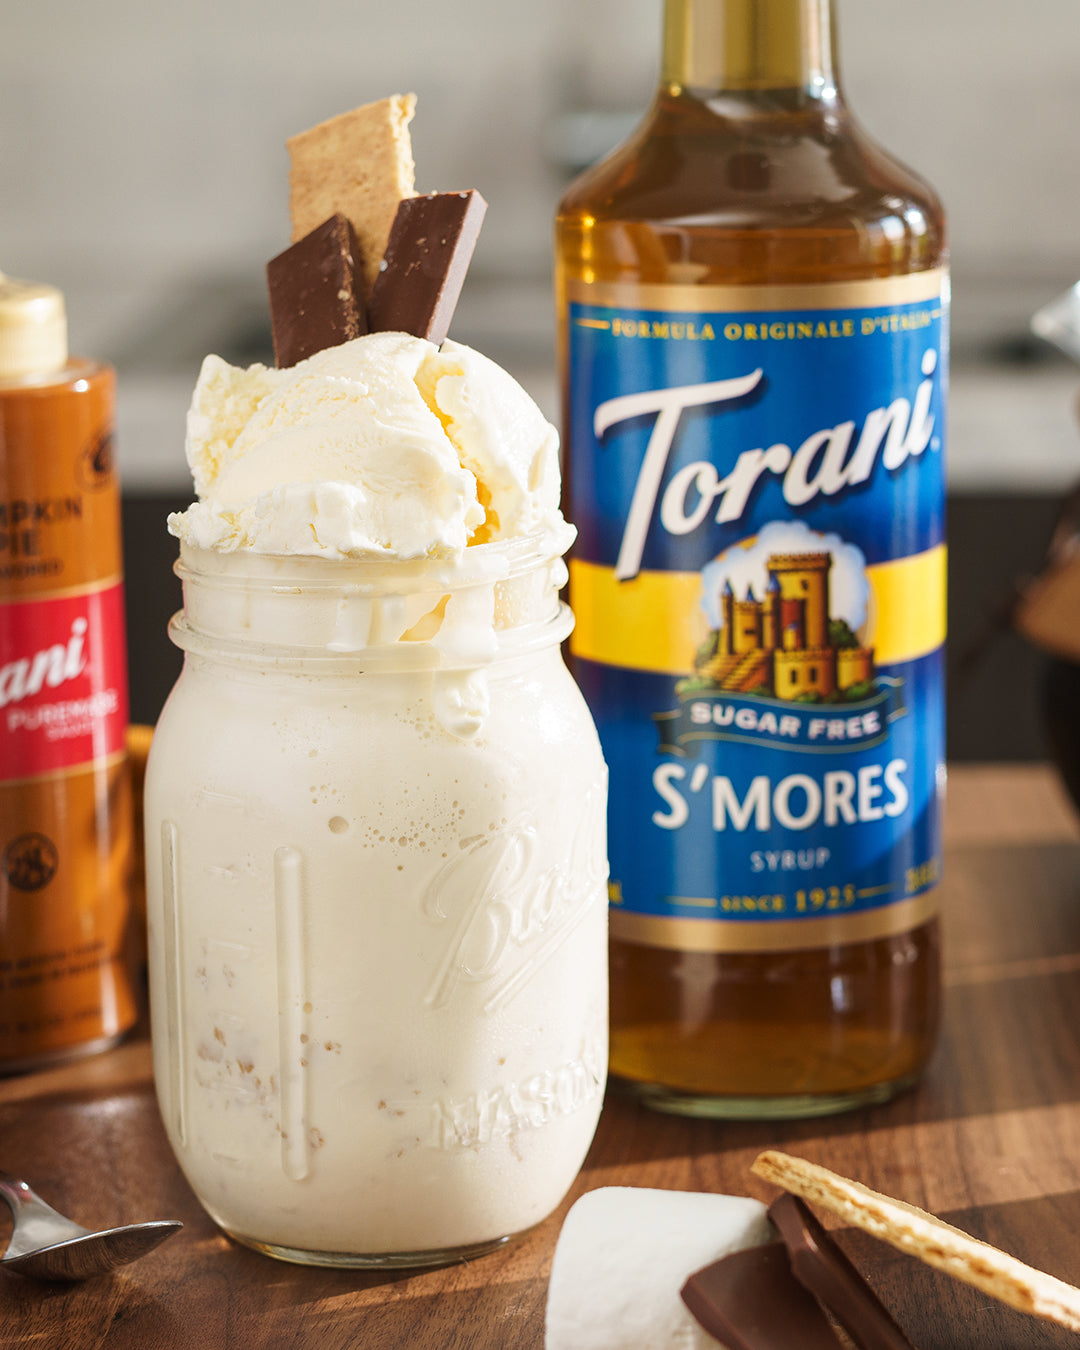 Torani Sugar Free Flavored Syrups - 750 ml Glass Bottle: S'Mores